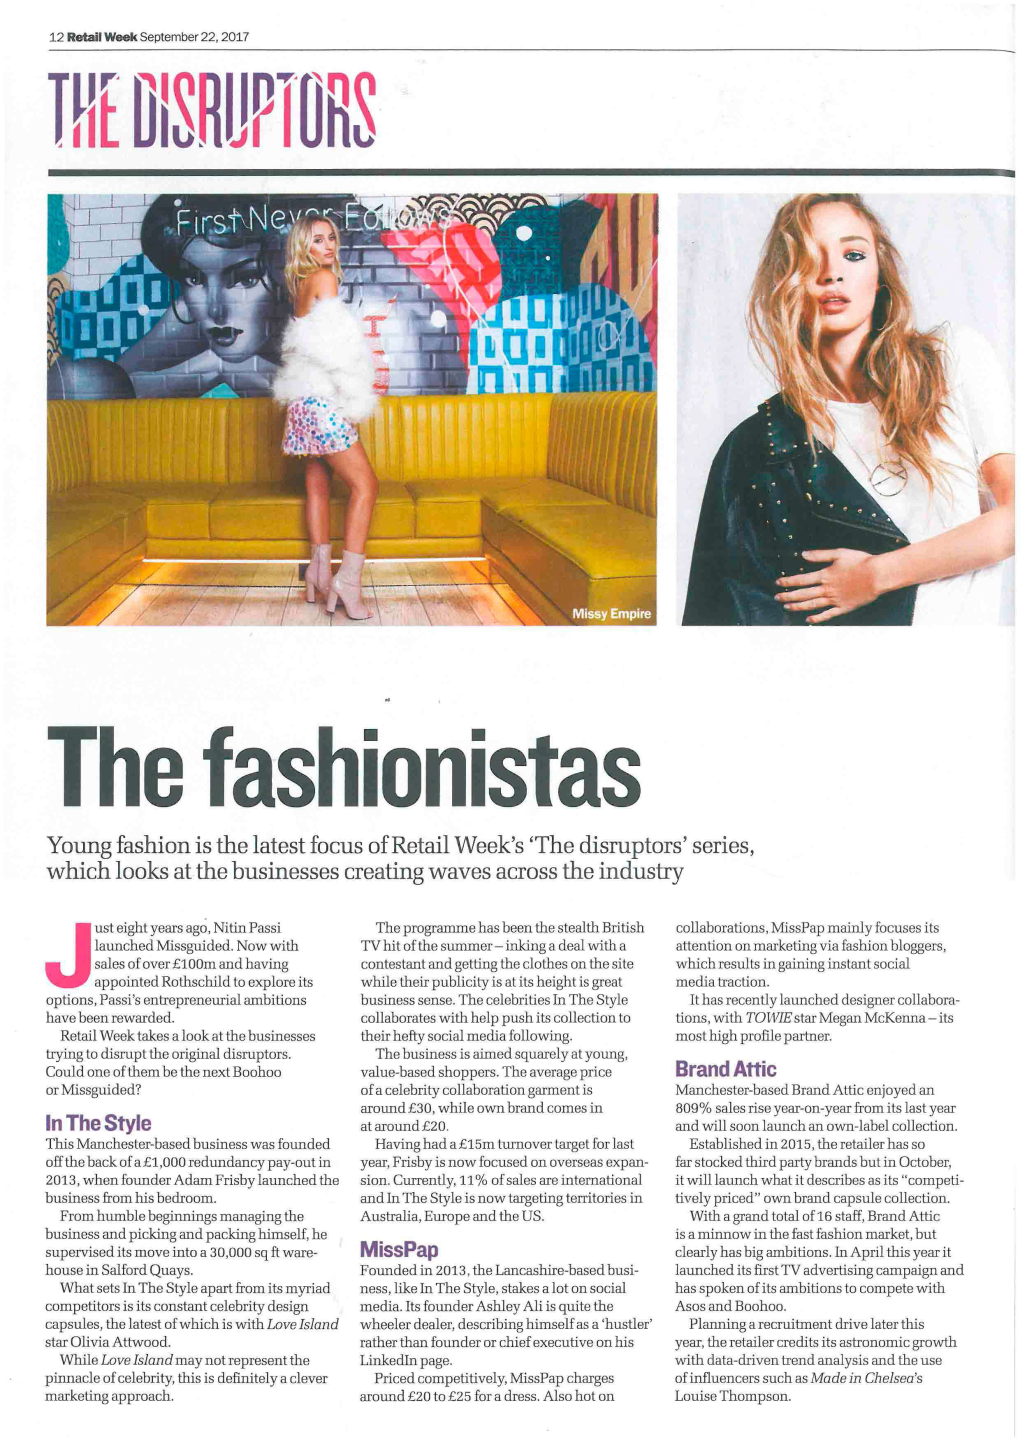 The Fashionistas Young Fashion Is the Latest Focus of Retail Week's the Disrupters' Series, Which Looks at the Businesses Creating Waves Across the Industry